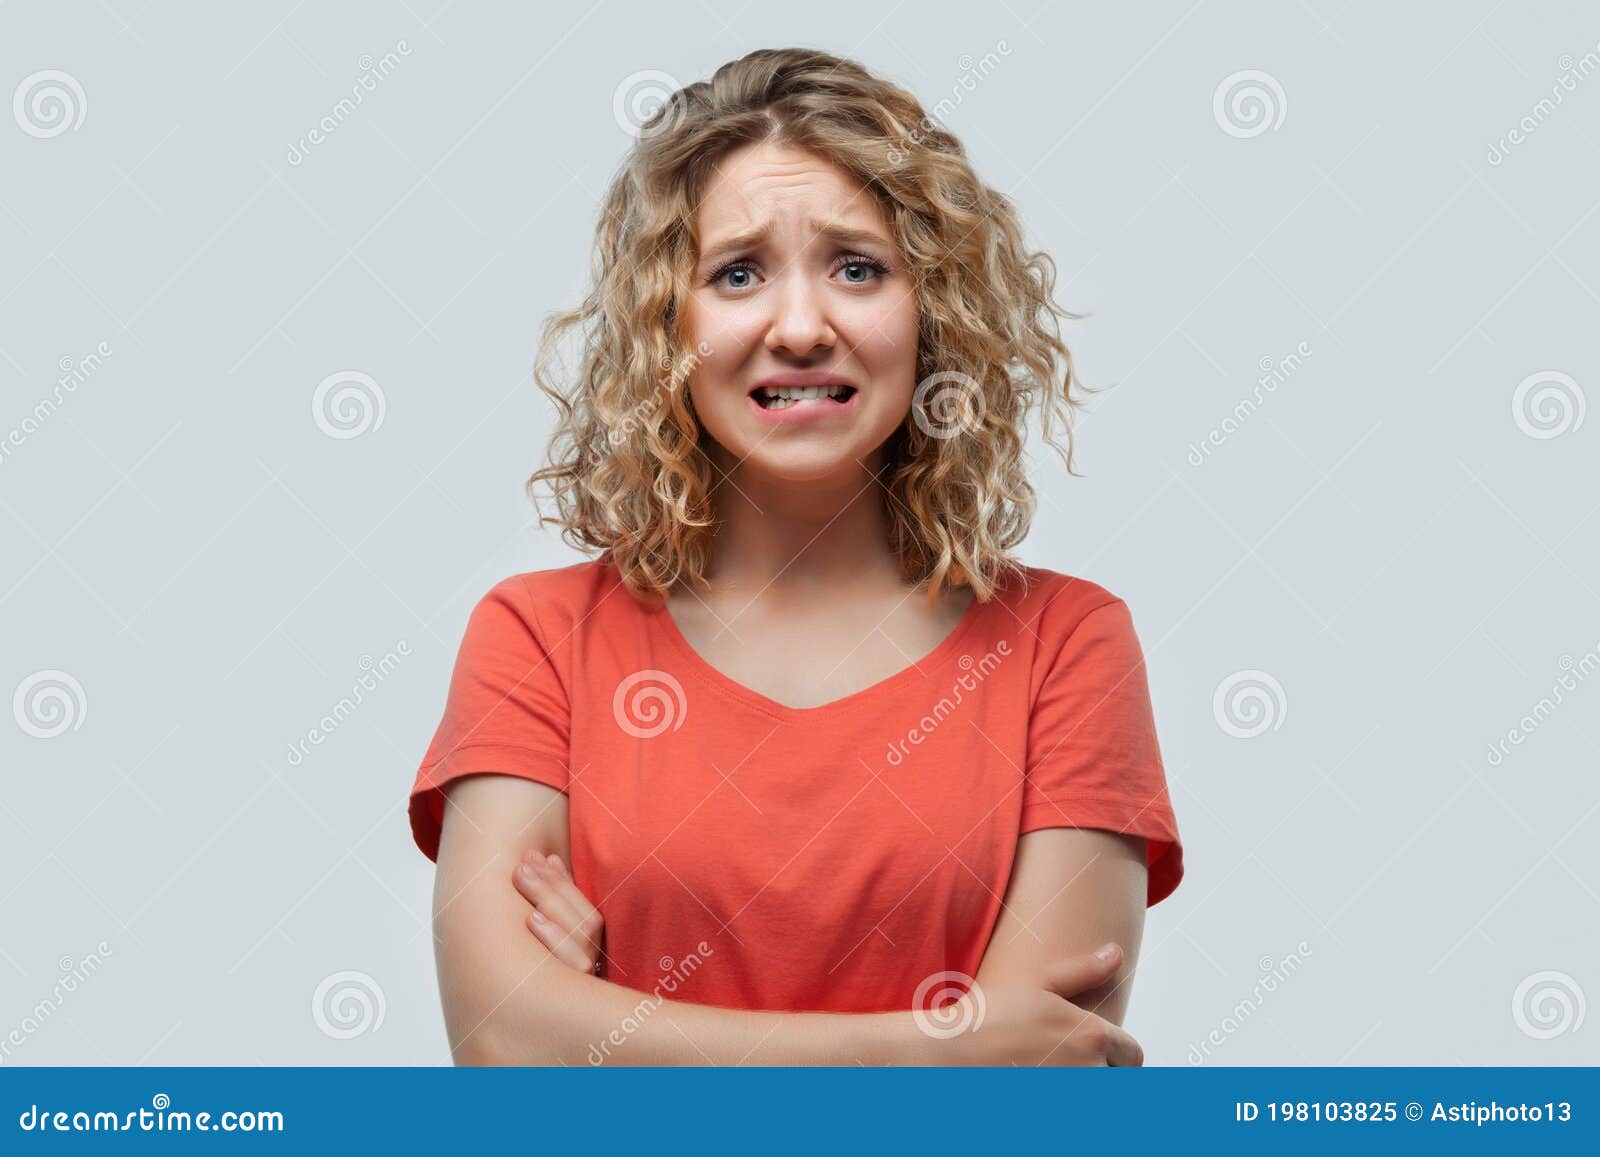 Portrait Of Embarrassed Blonde Girl In Casual T Shirt Looking At Camera Human Emotions Facial 